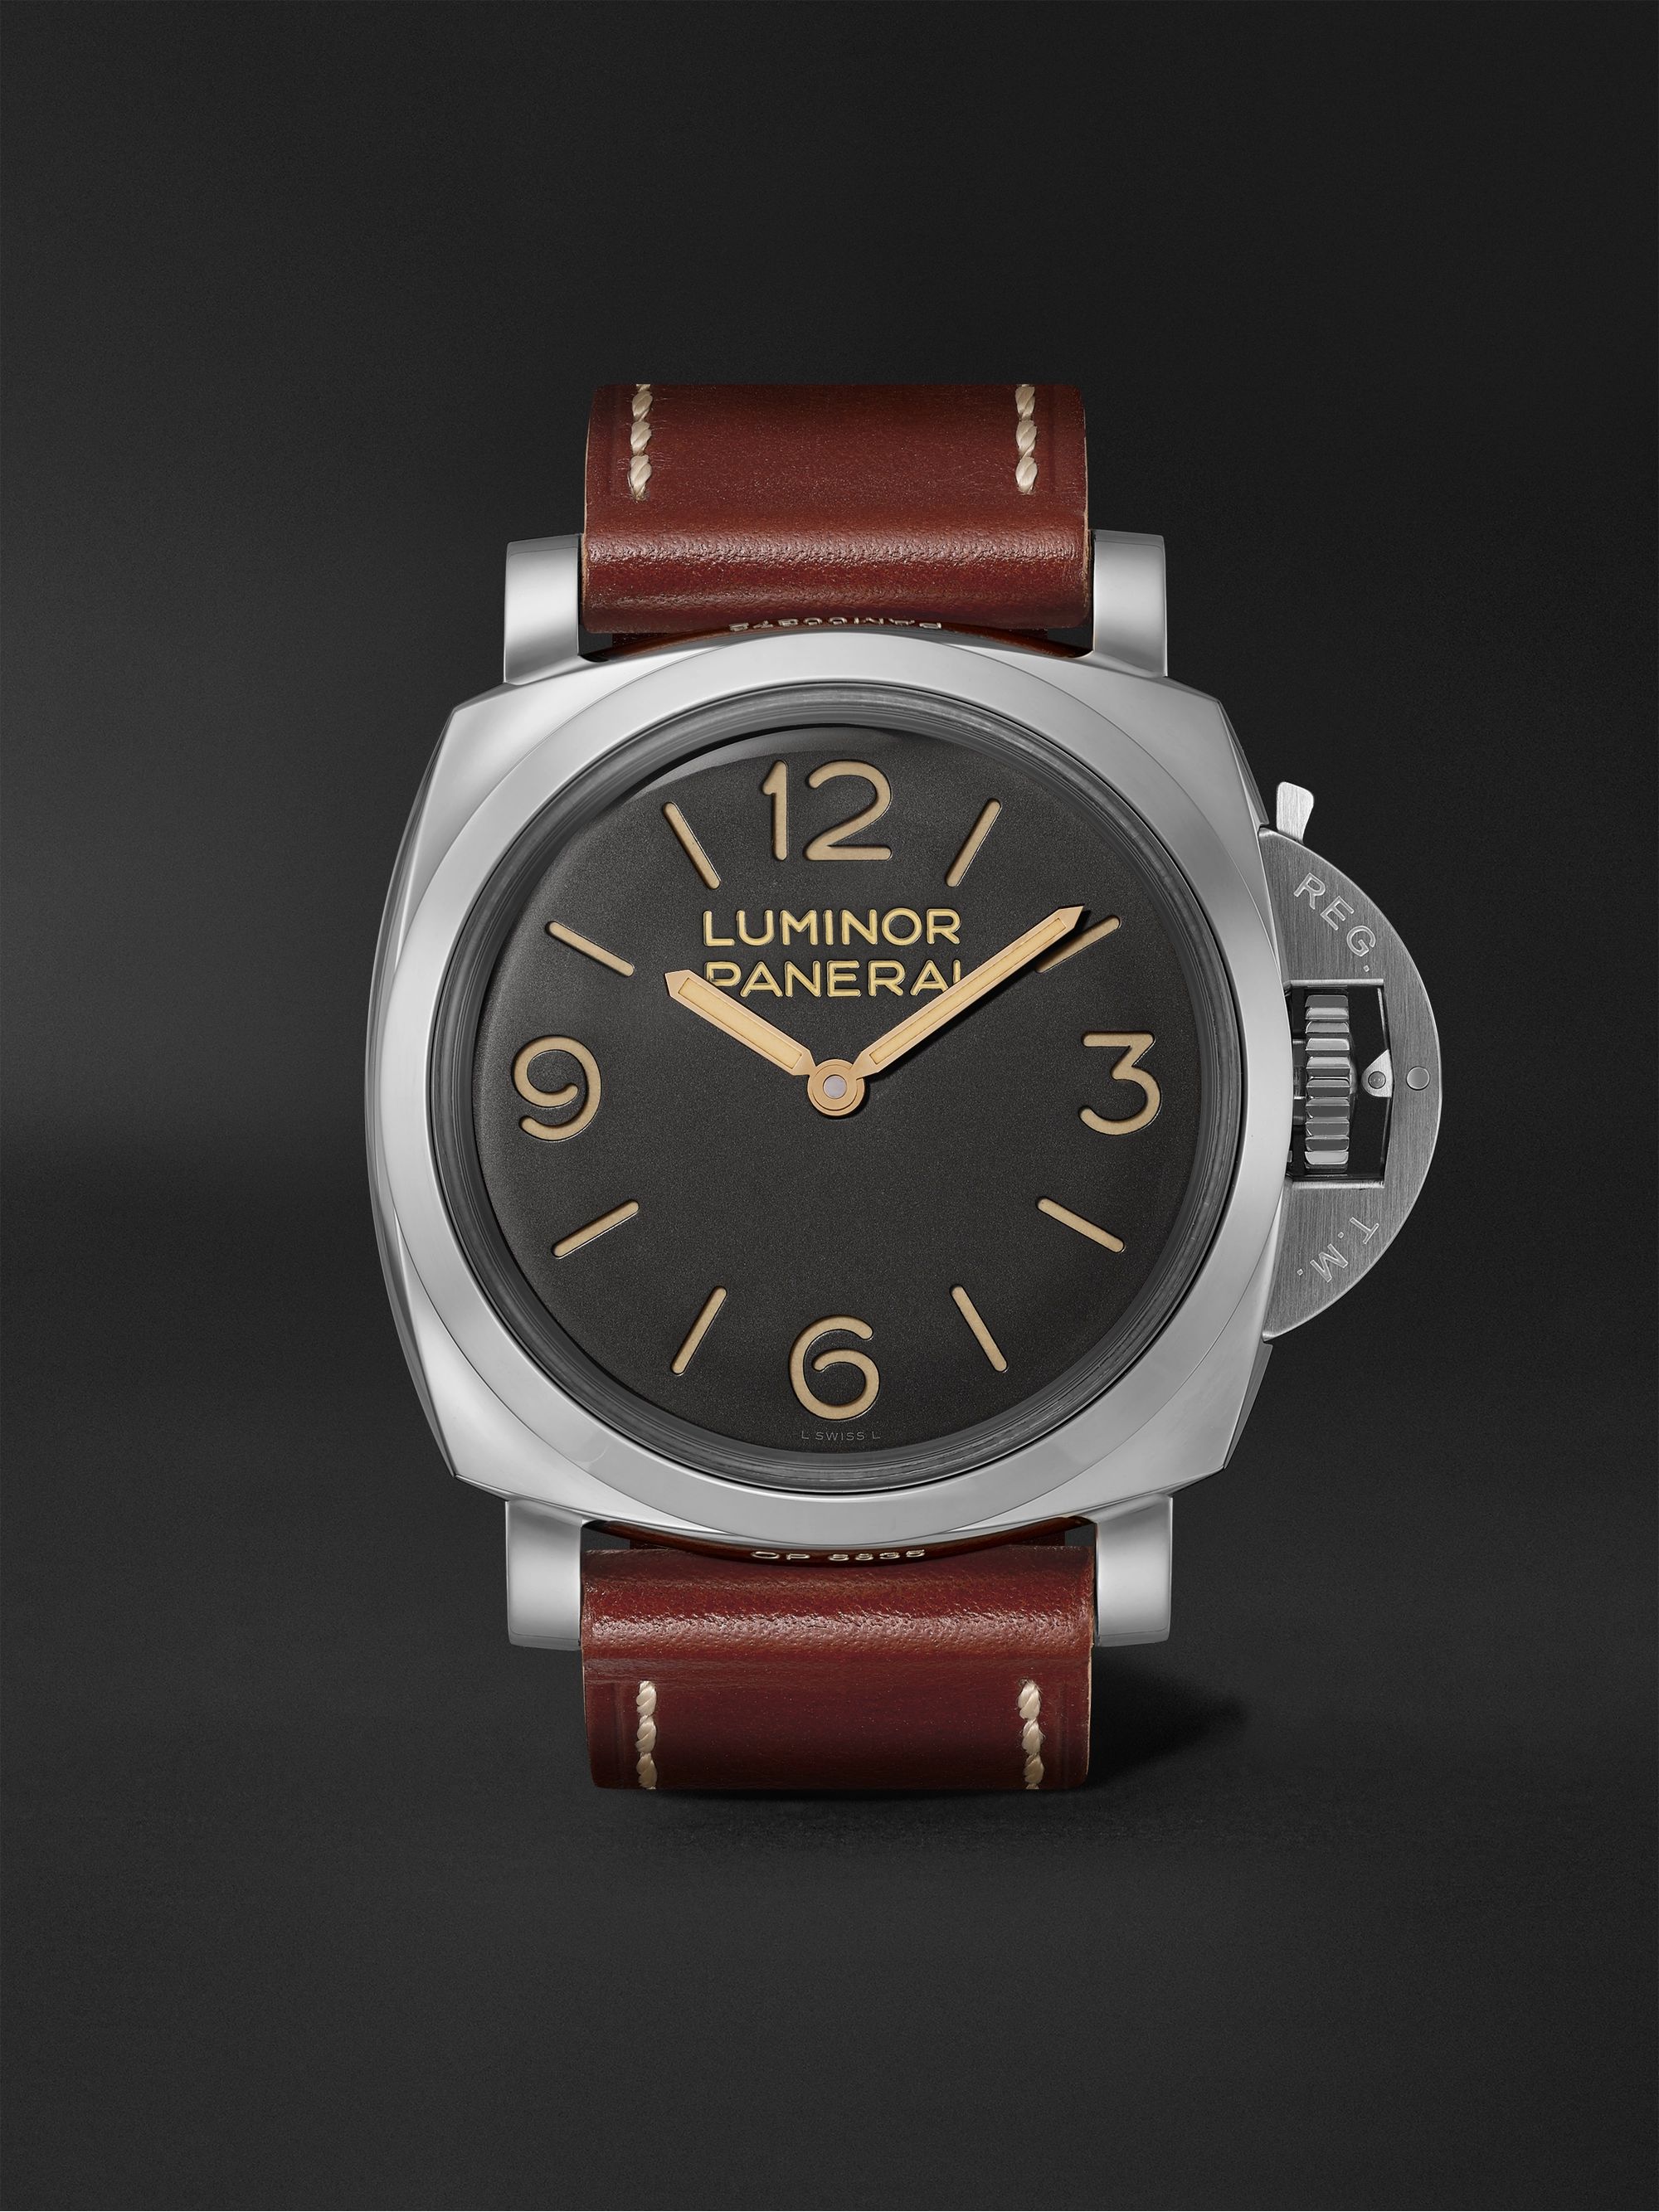 PANERAI Luminor 1950 Hand-Wound 47mm Stainless Steel and Leather Watch, Ref. No. PAM00372